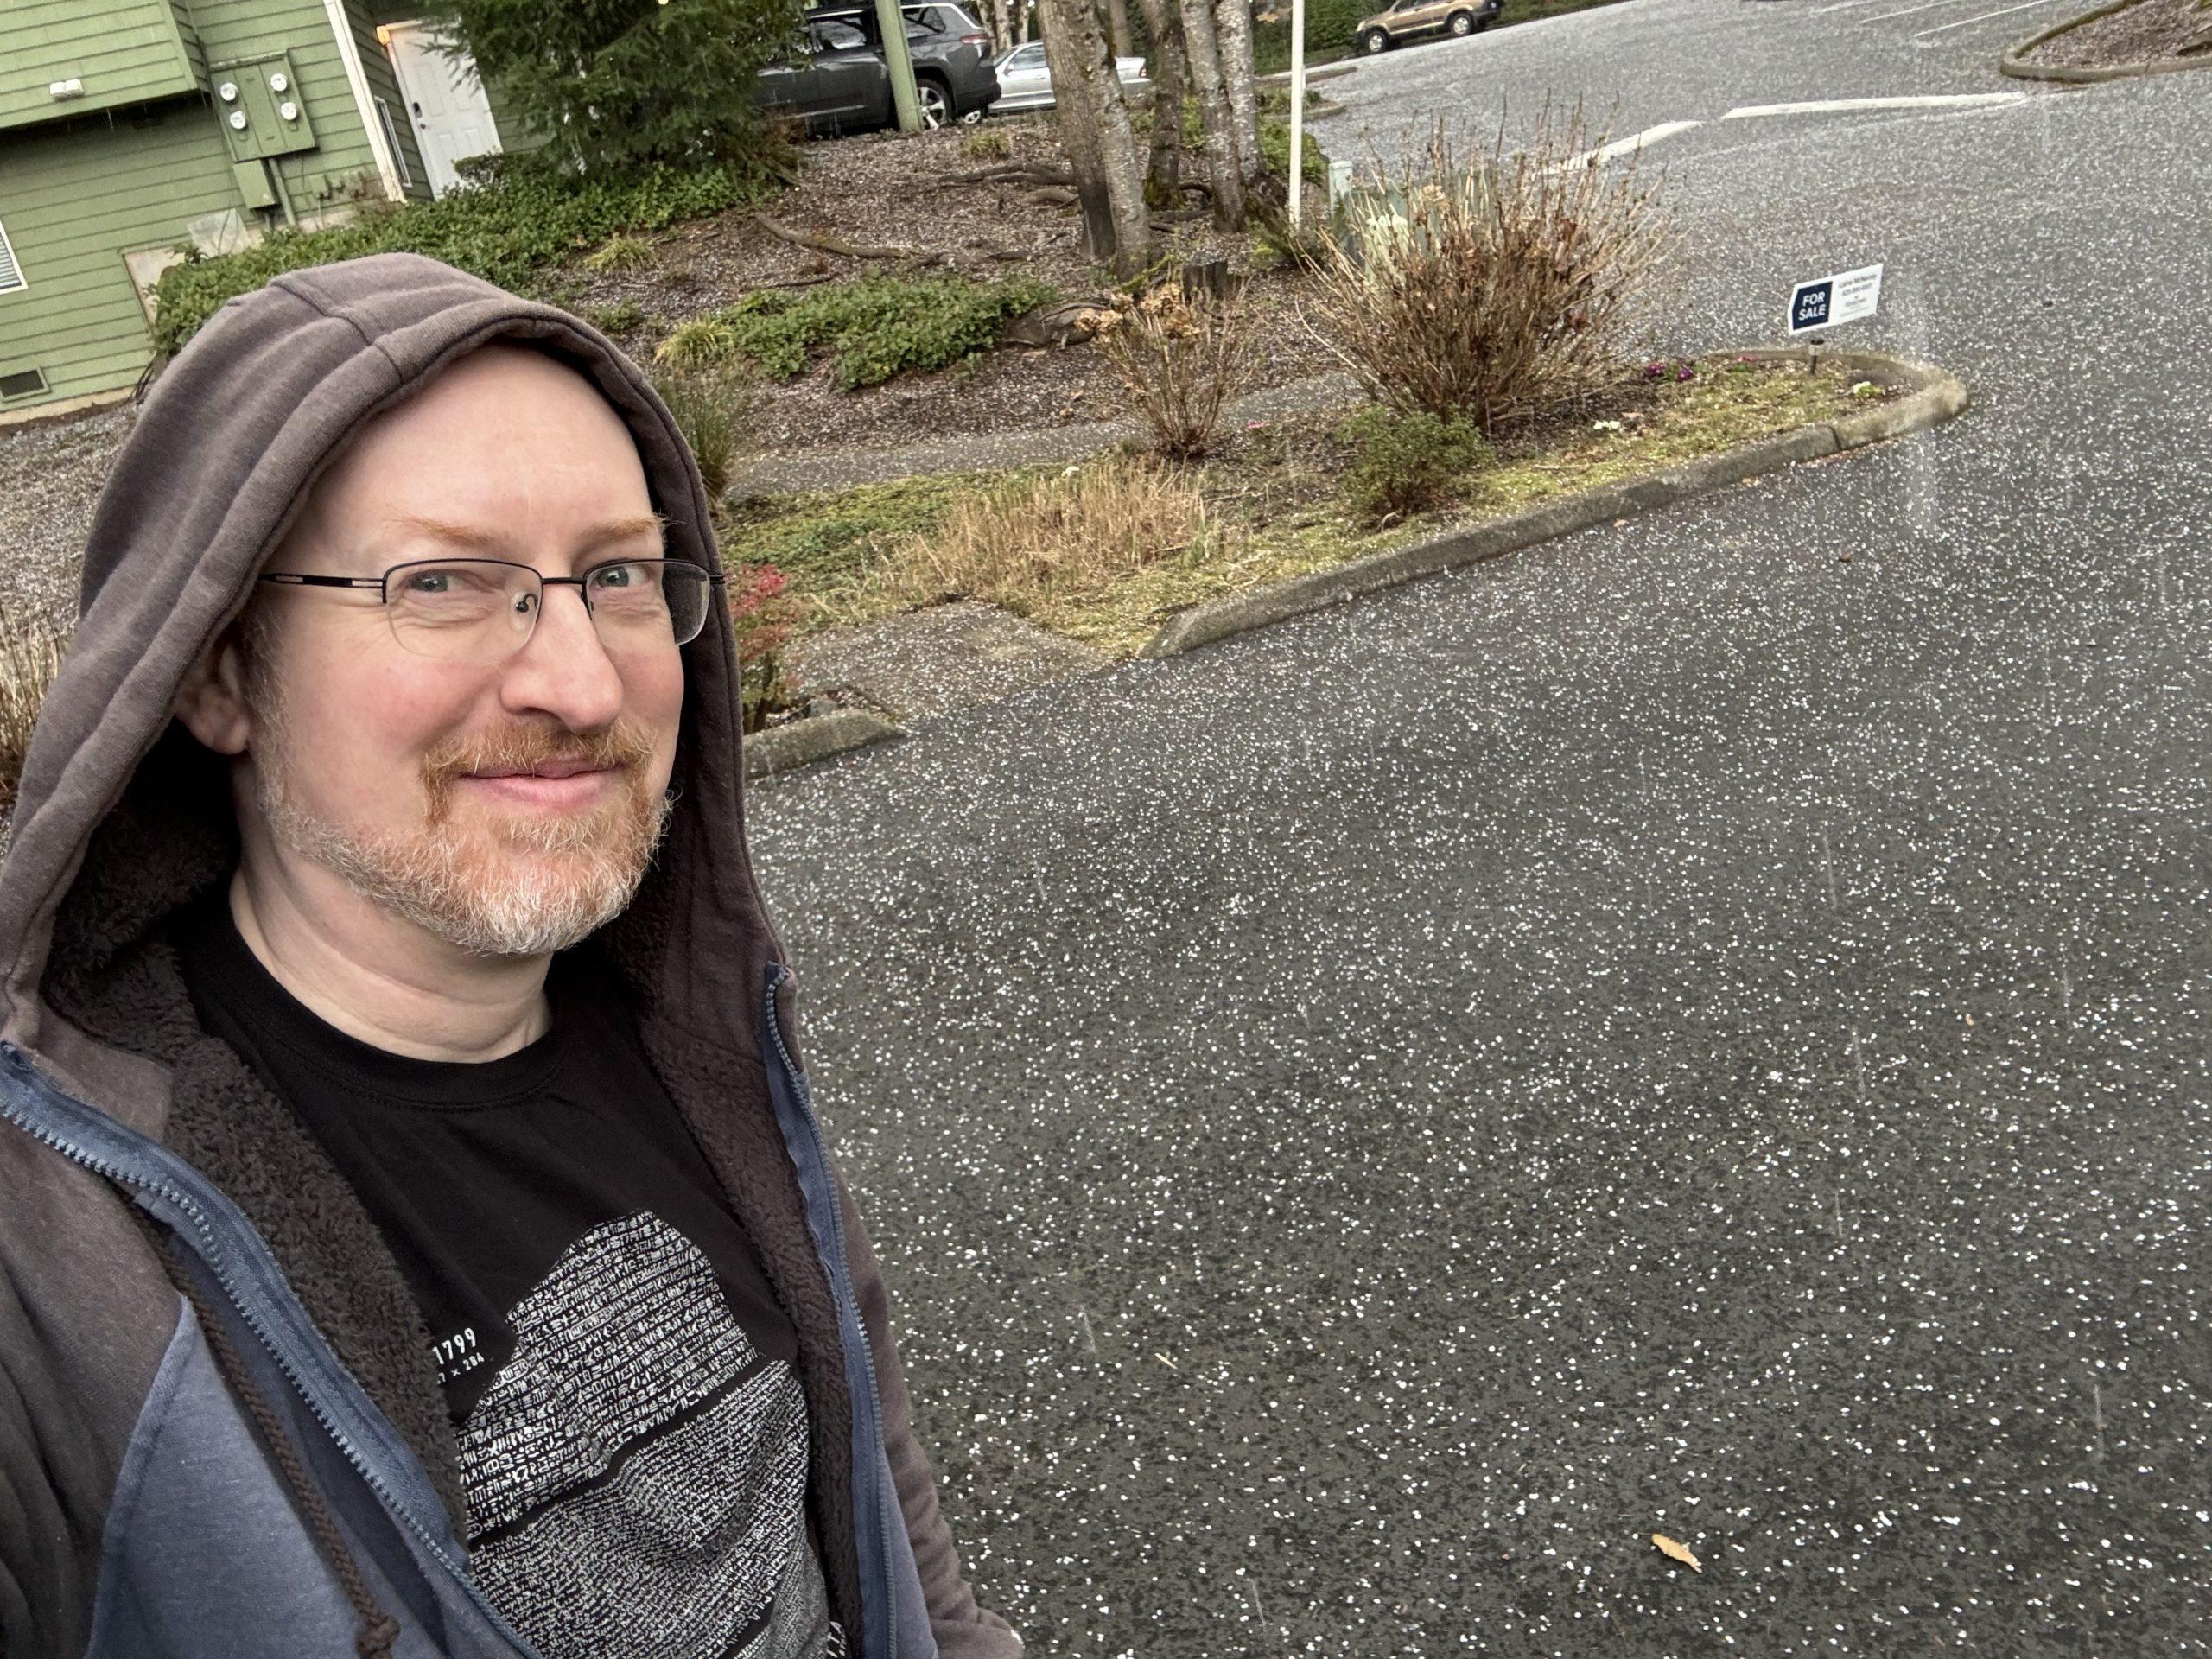 Me standing outside, with my hoodie pulled up over my head, with a very visible scattering of hail across the ground.